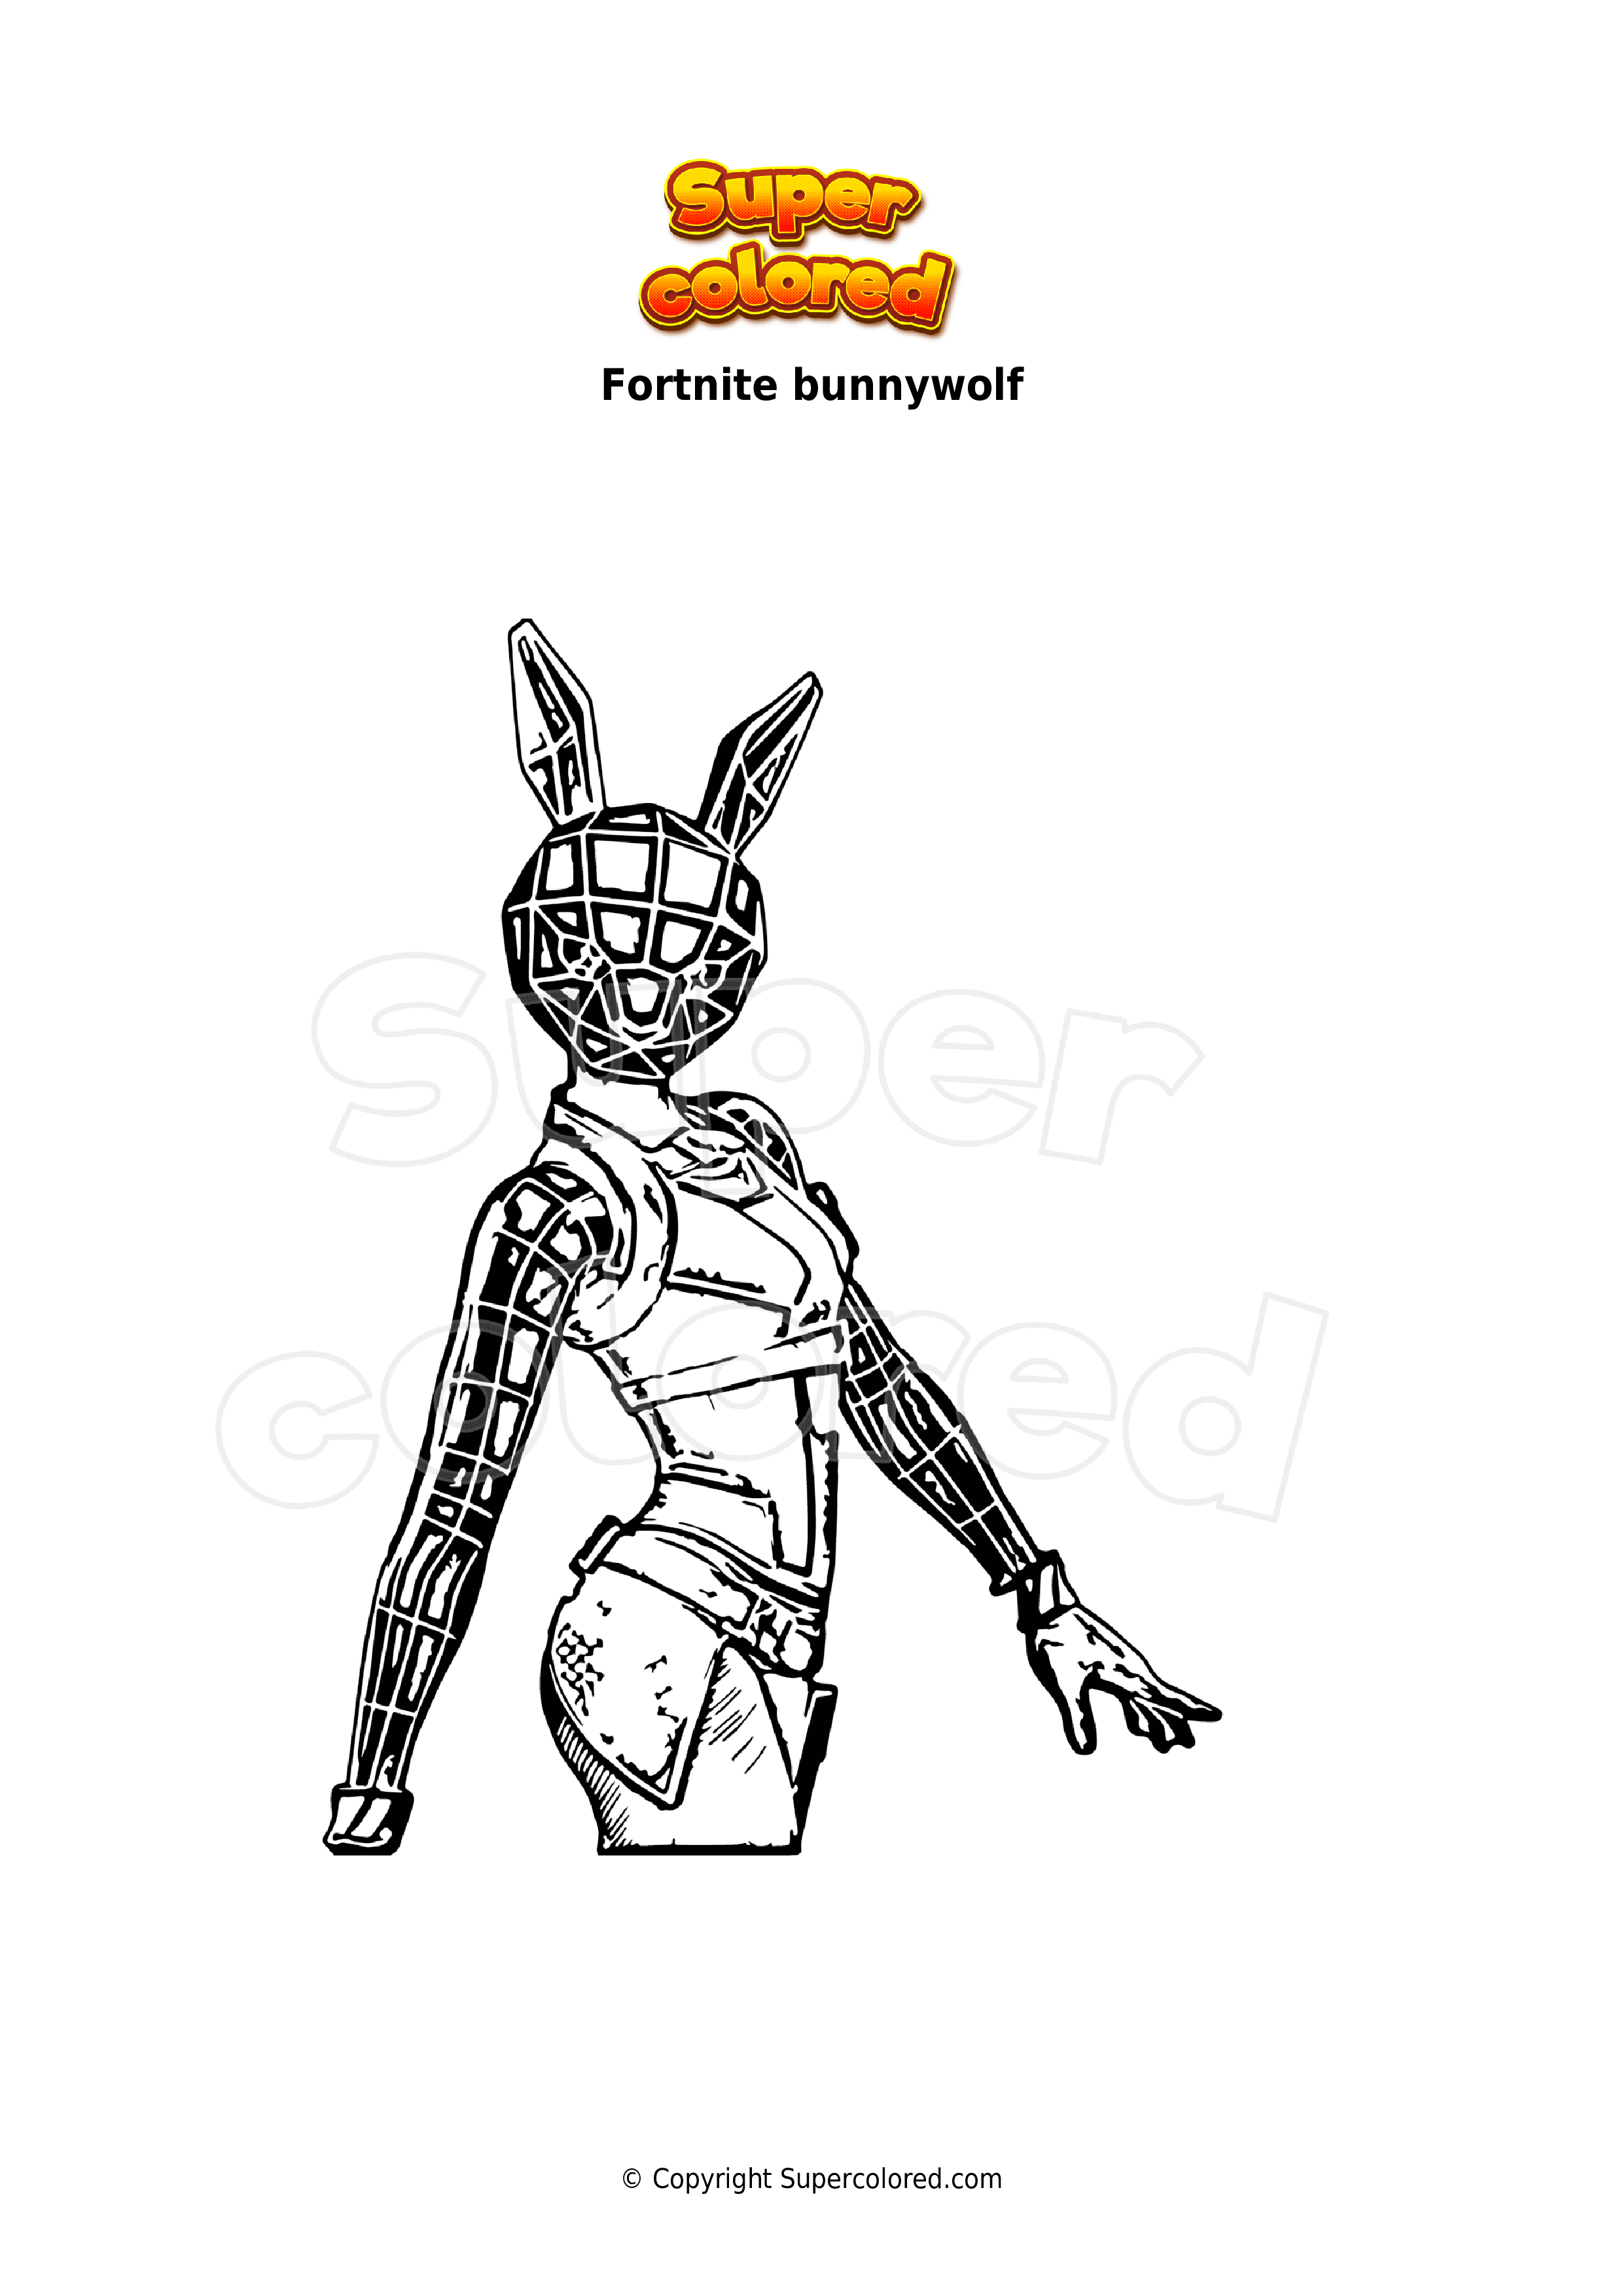 Fortnite Bunny Skin Coloring Page